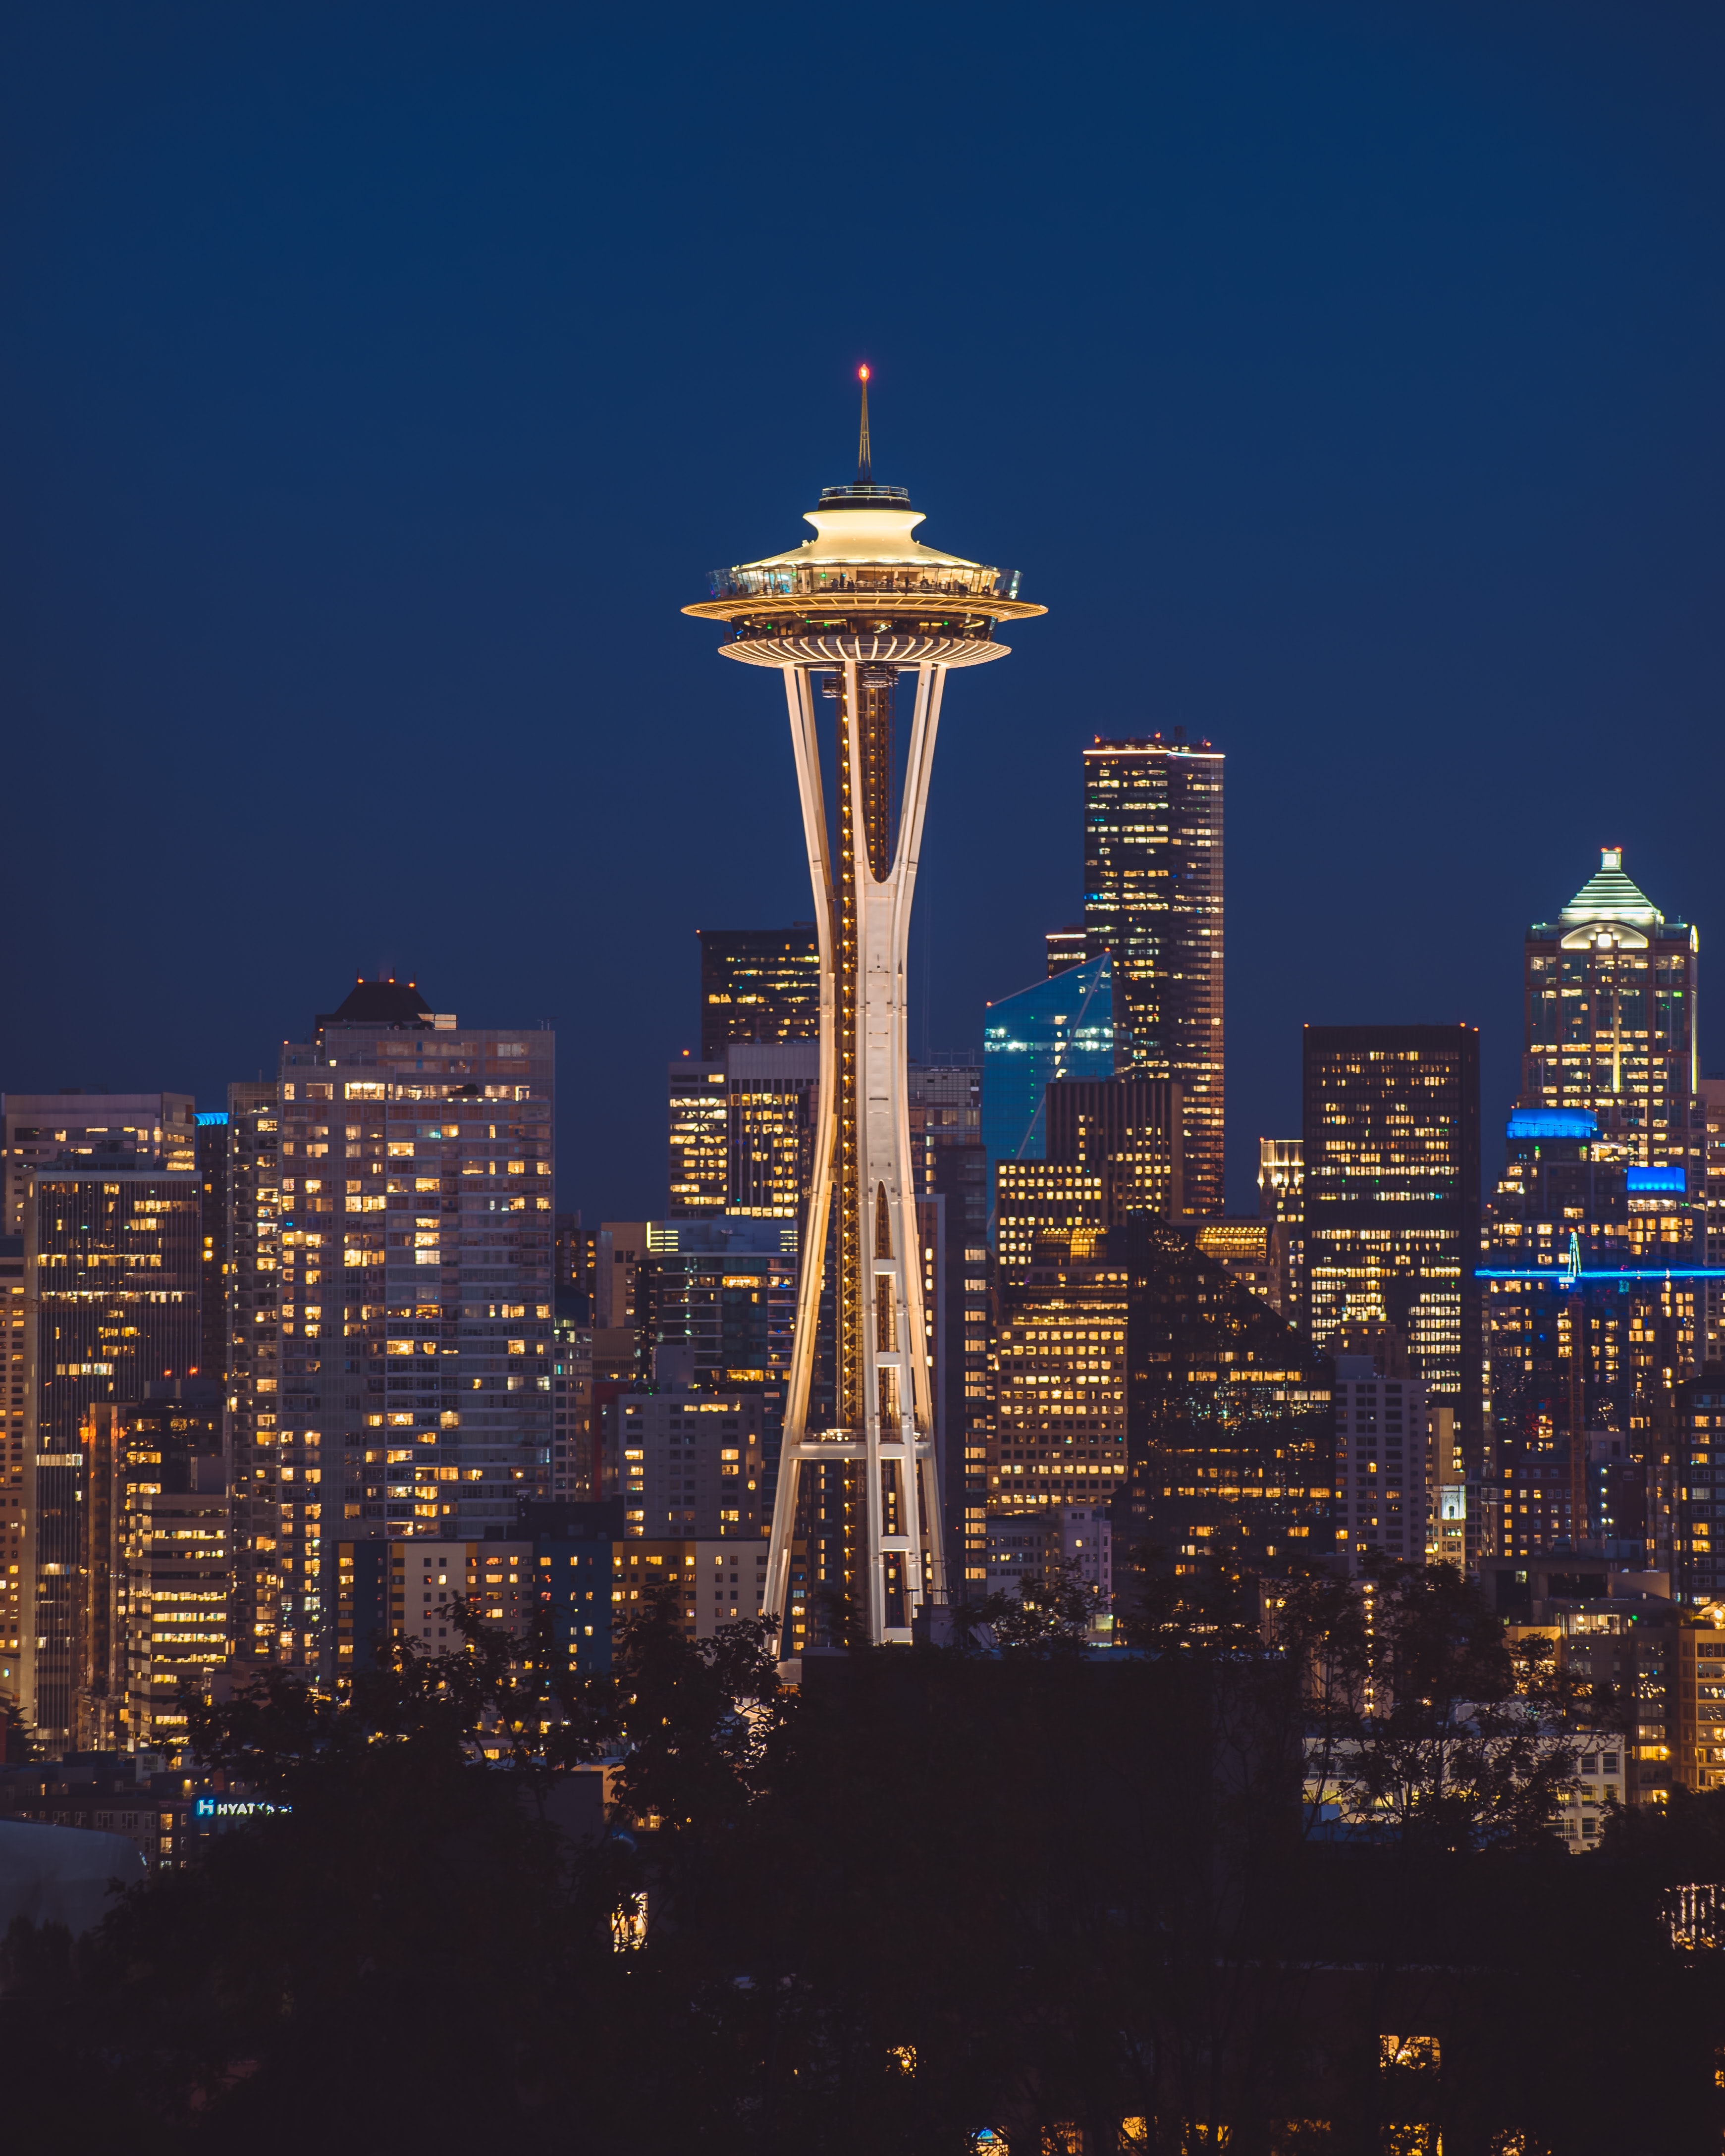 tower, night city, architecture, cities, usa, building, skyscrapers, united states, seattle images